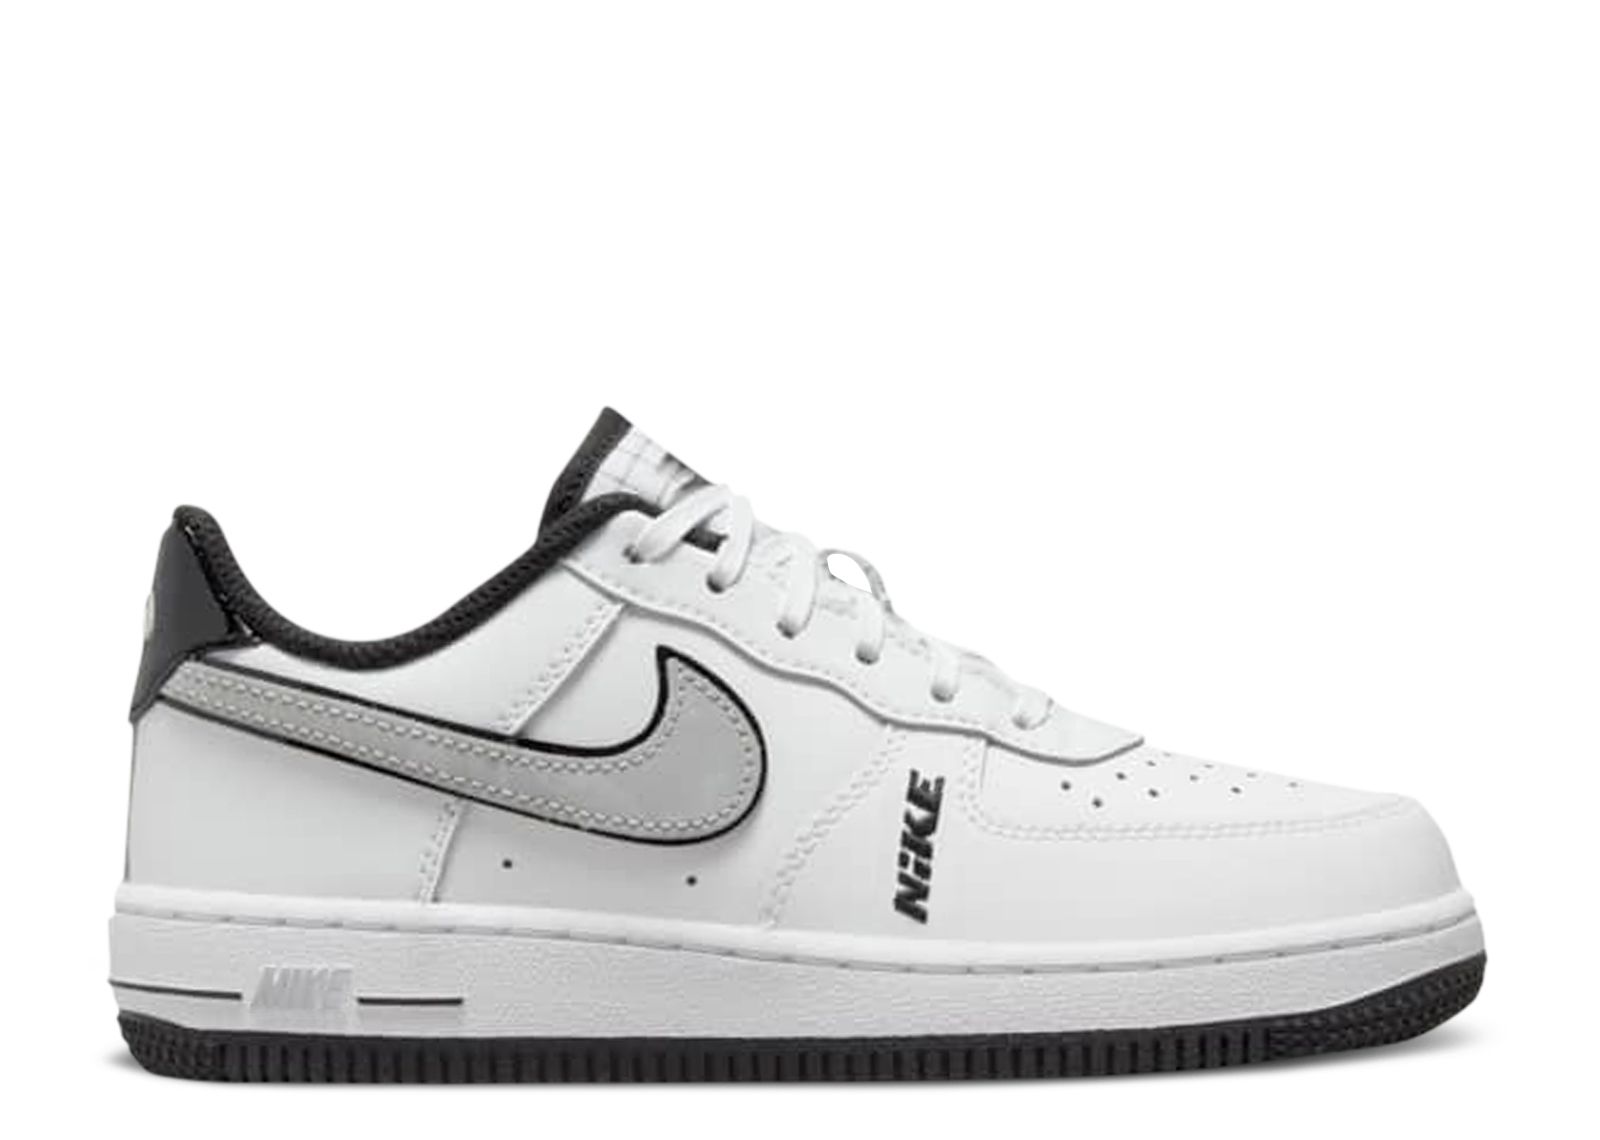 Air Force 1 White Black Wolf Grey LV8 On Foot Sneaker Review QuickSchopes  307 Schopes DV3501 100 